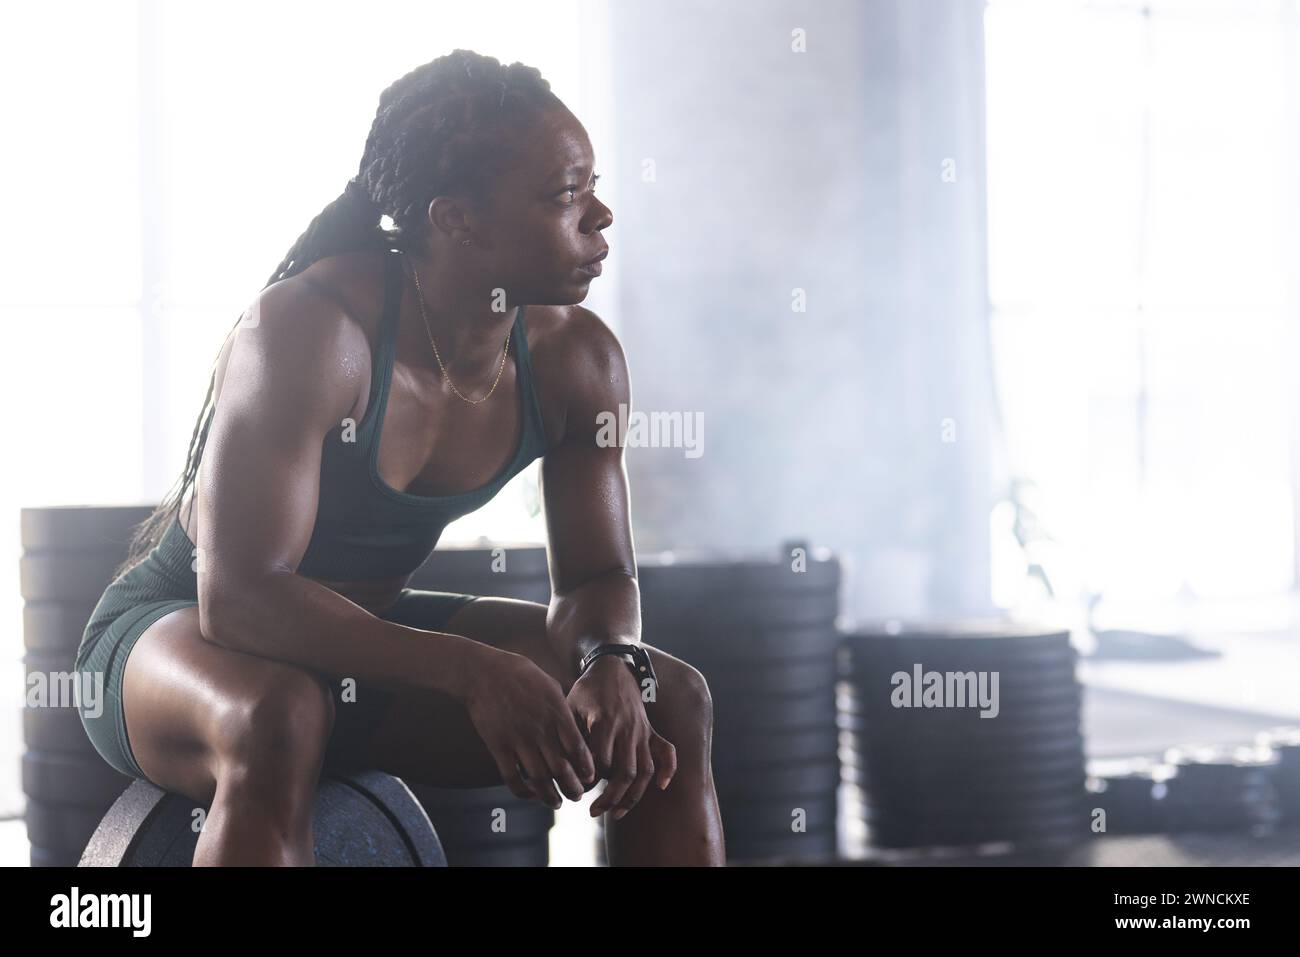 Biracial athlete in gym attire rests with determination, embodying strength. Stock Photo